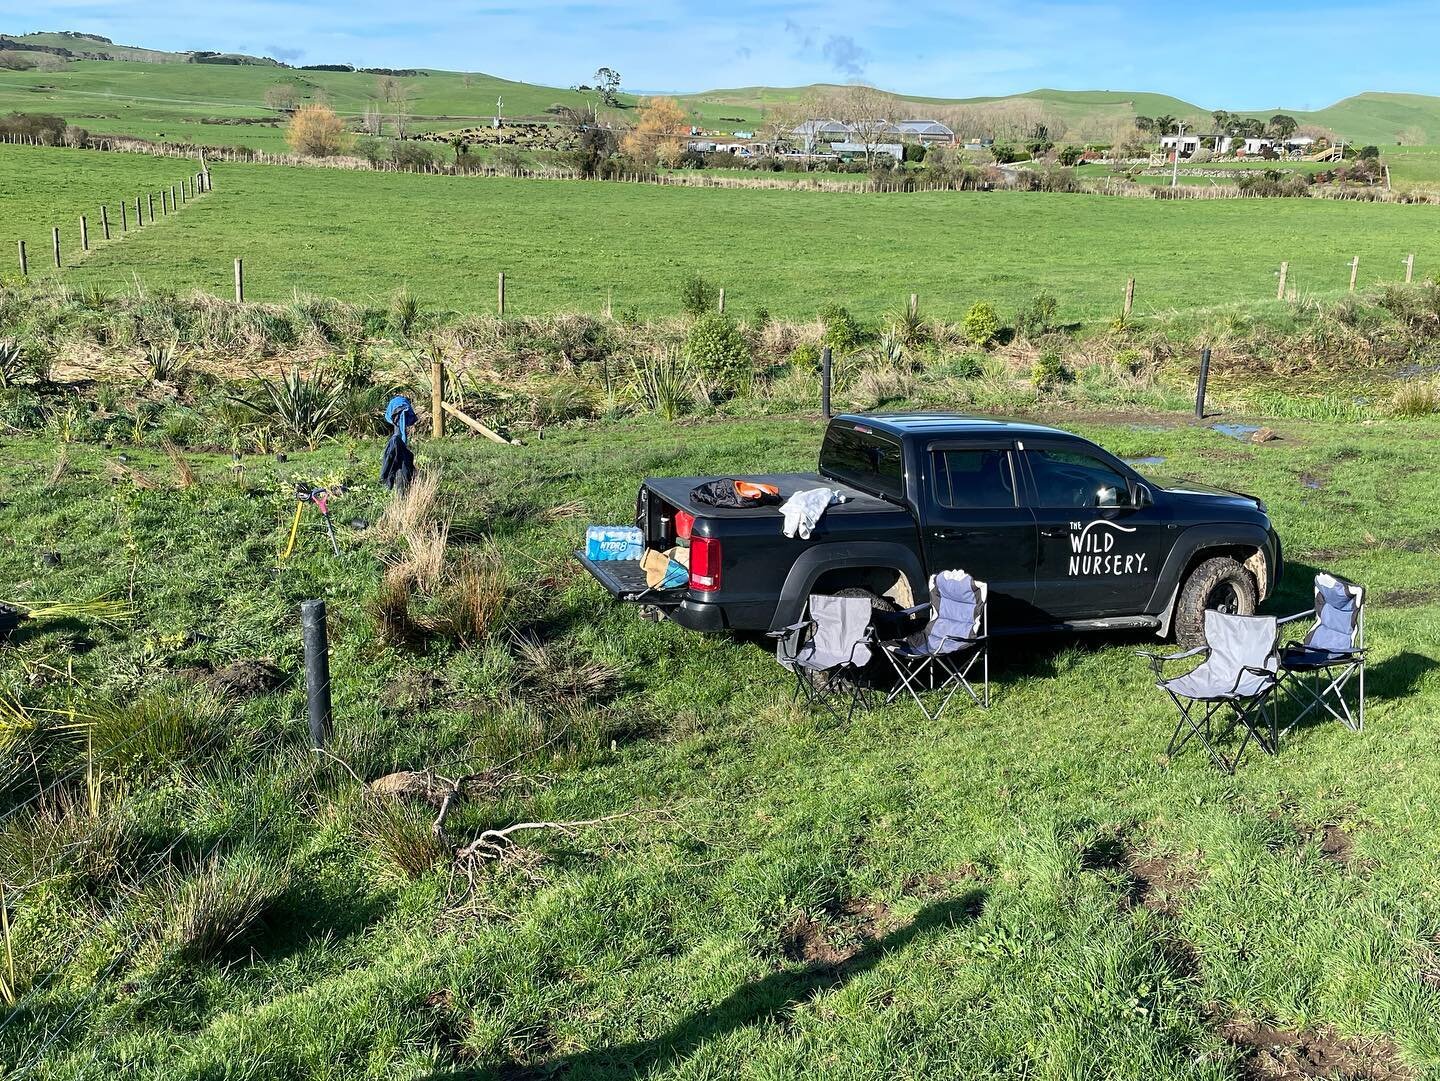 Over 4,000 native grasses, flaxes and trees planted by Wild Nursery around our Tuna drains. Awesome job. Super healthy trees. Big thanks to NZ Landcare Trust, Waikato River Authority, WCEET, Trees that Count for their support, and Wild Nursery for th